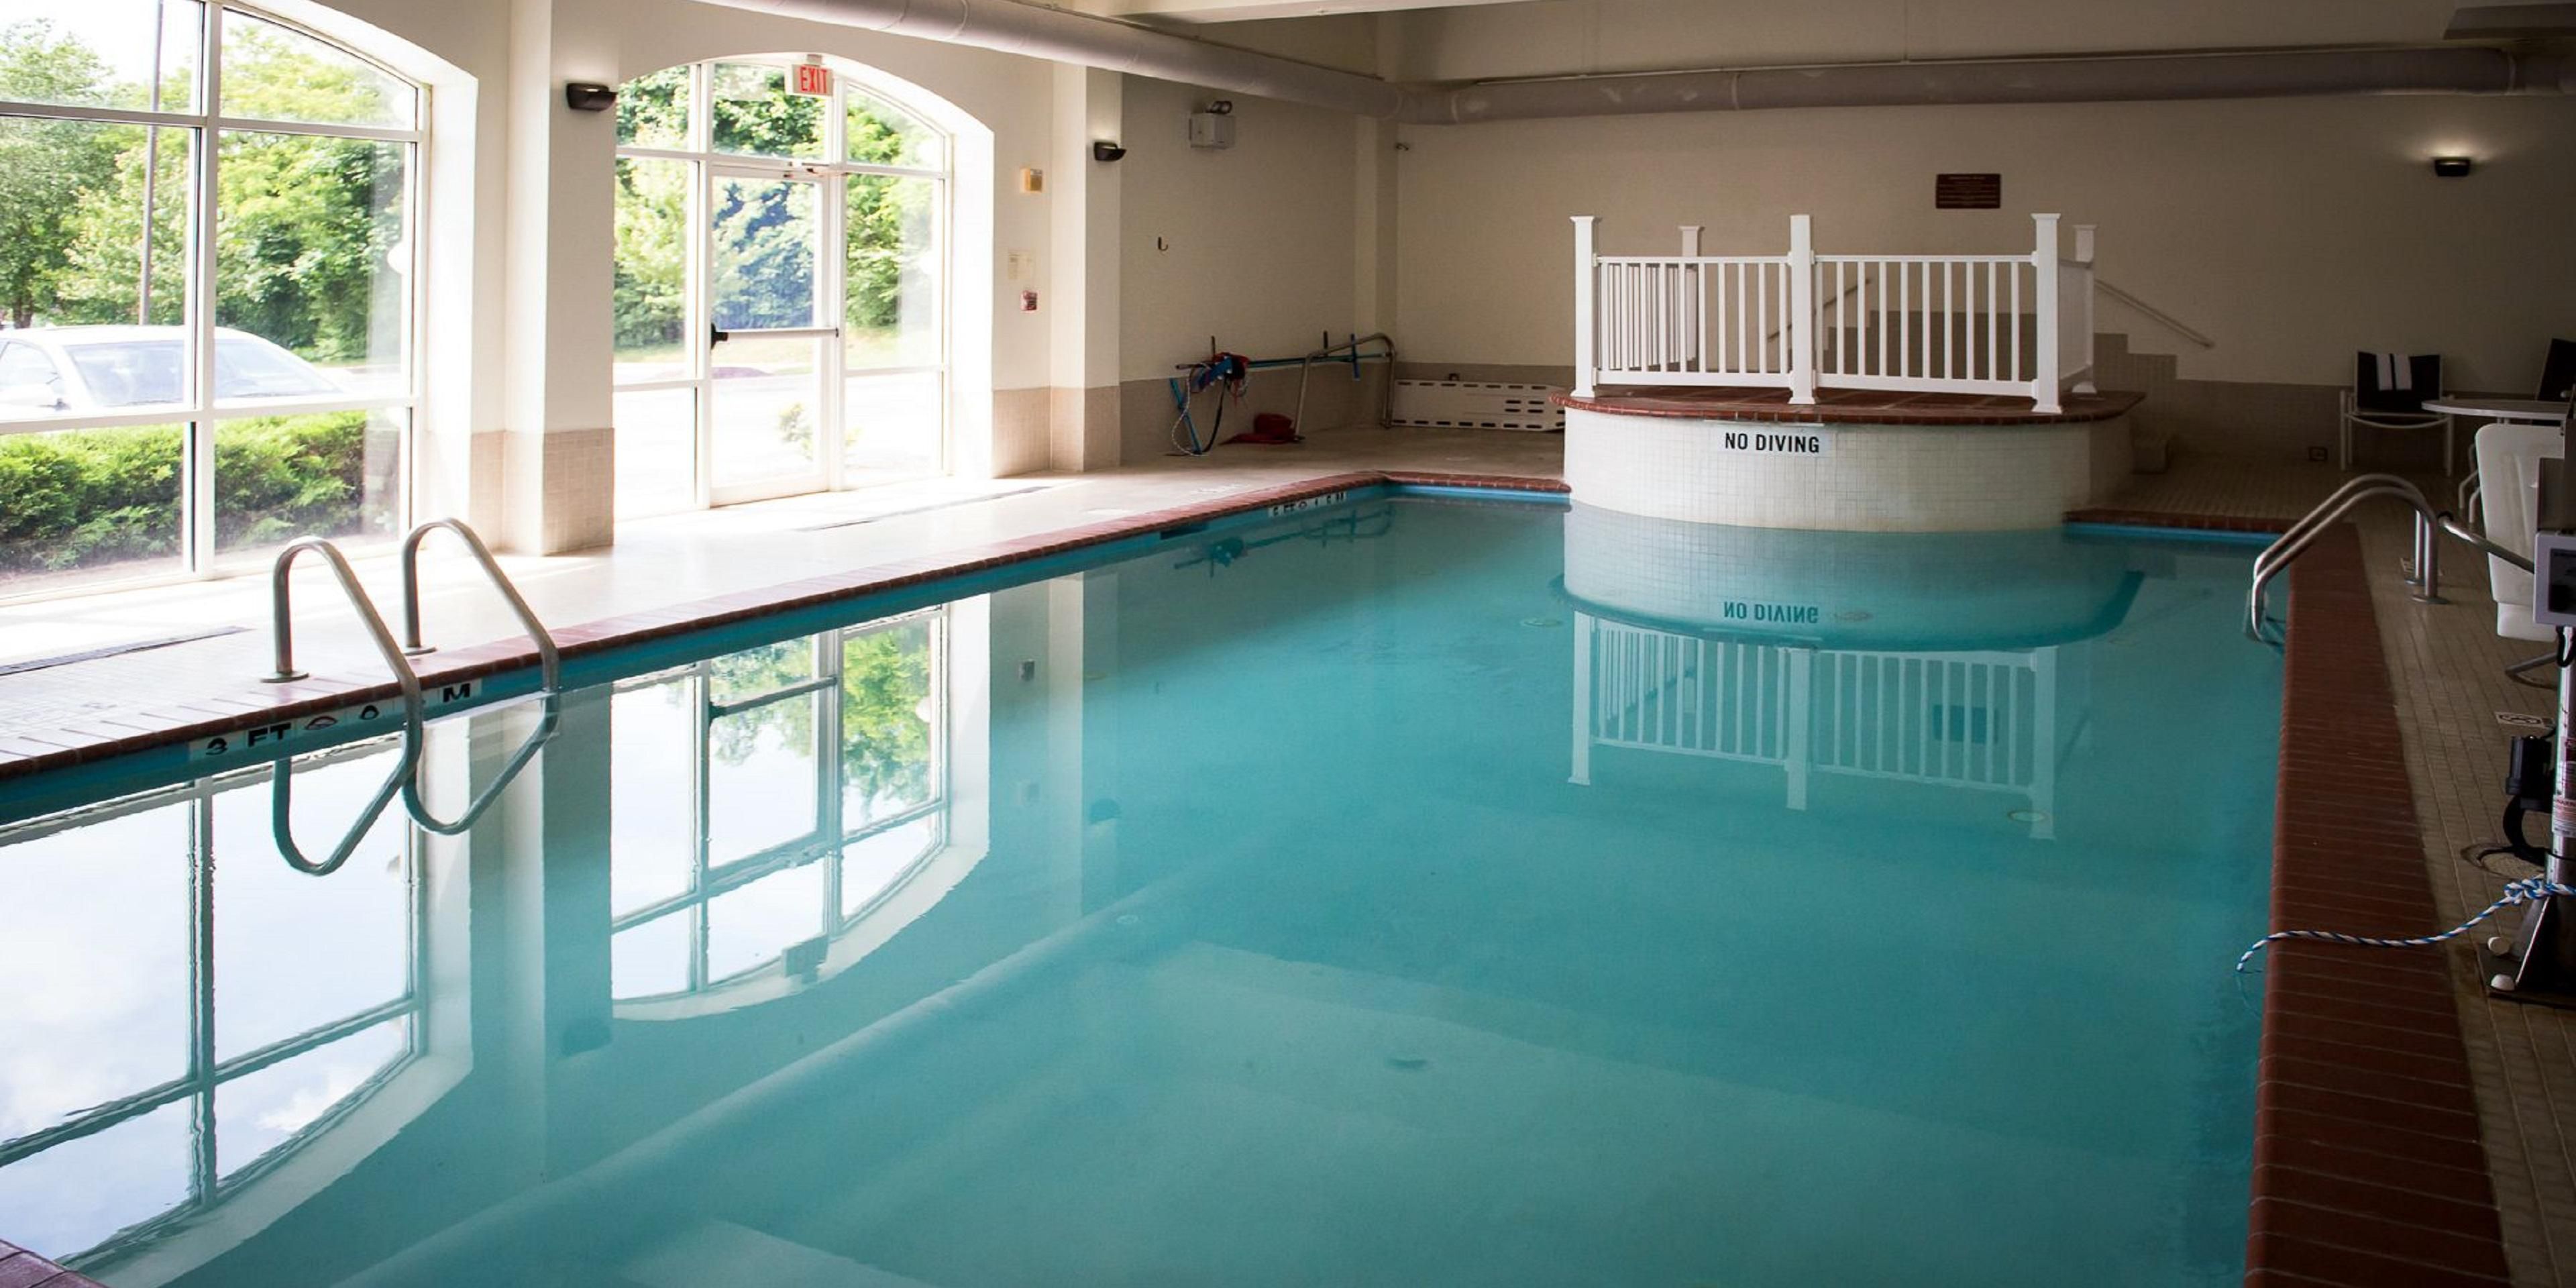 Our indoor pool is open all year round.